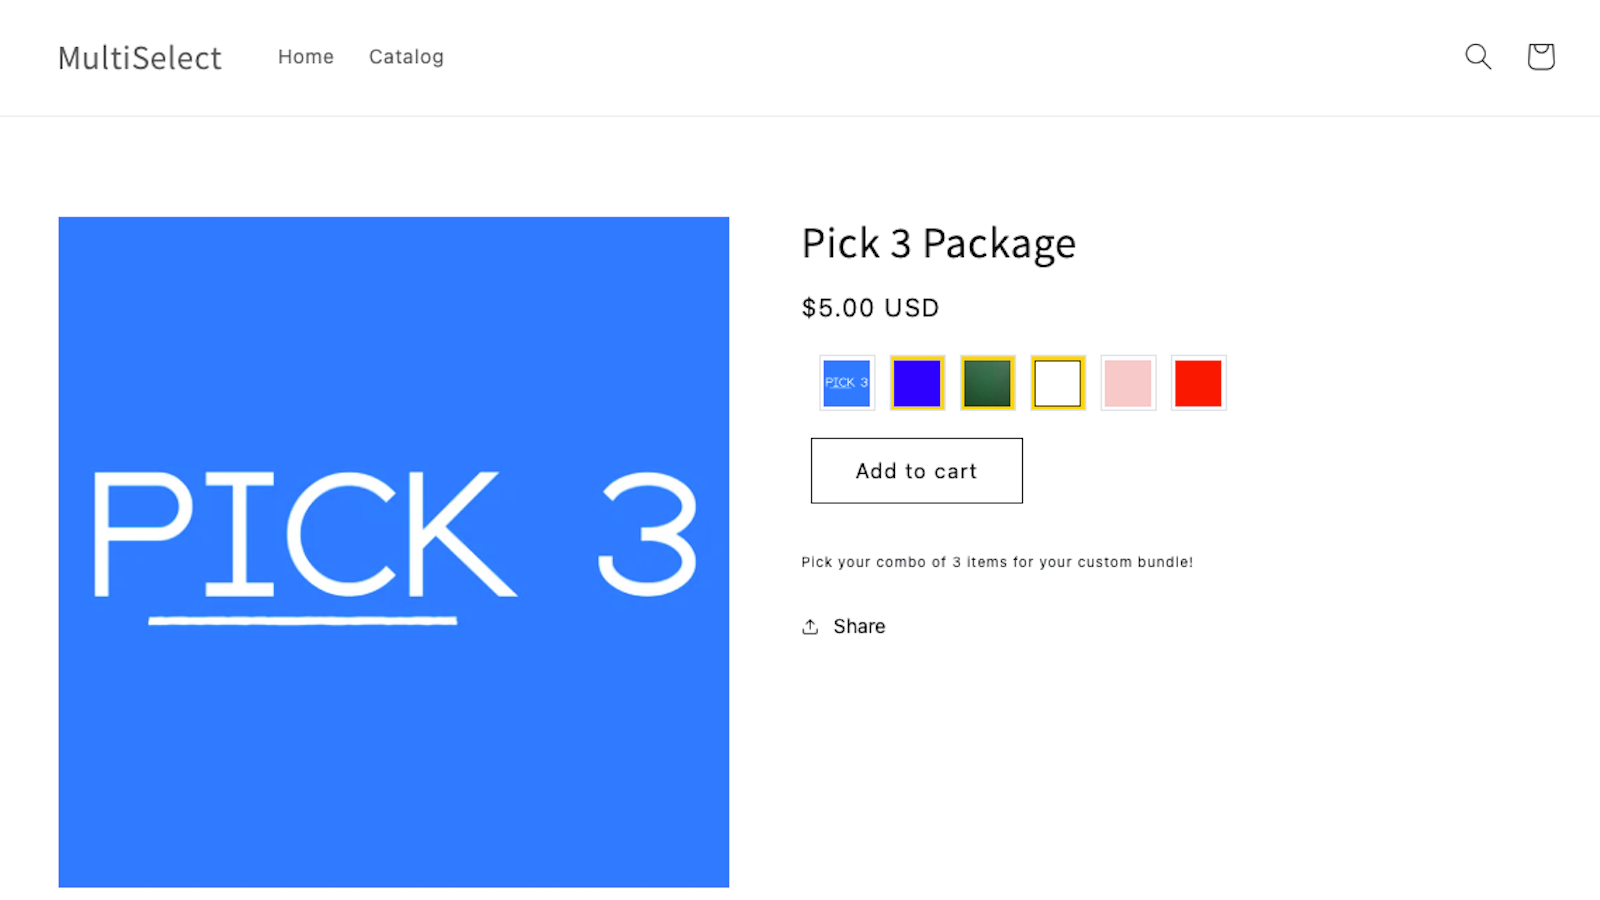 Three variants selected and added to cart easily.